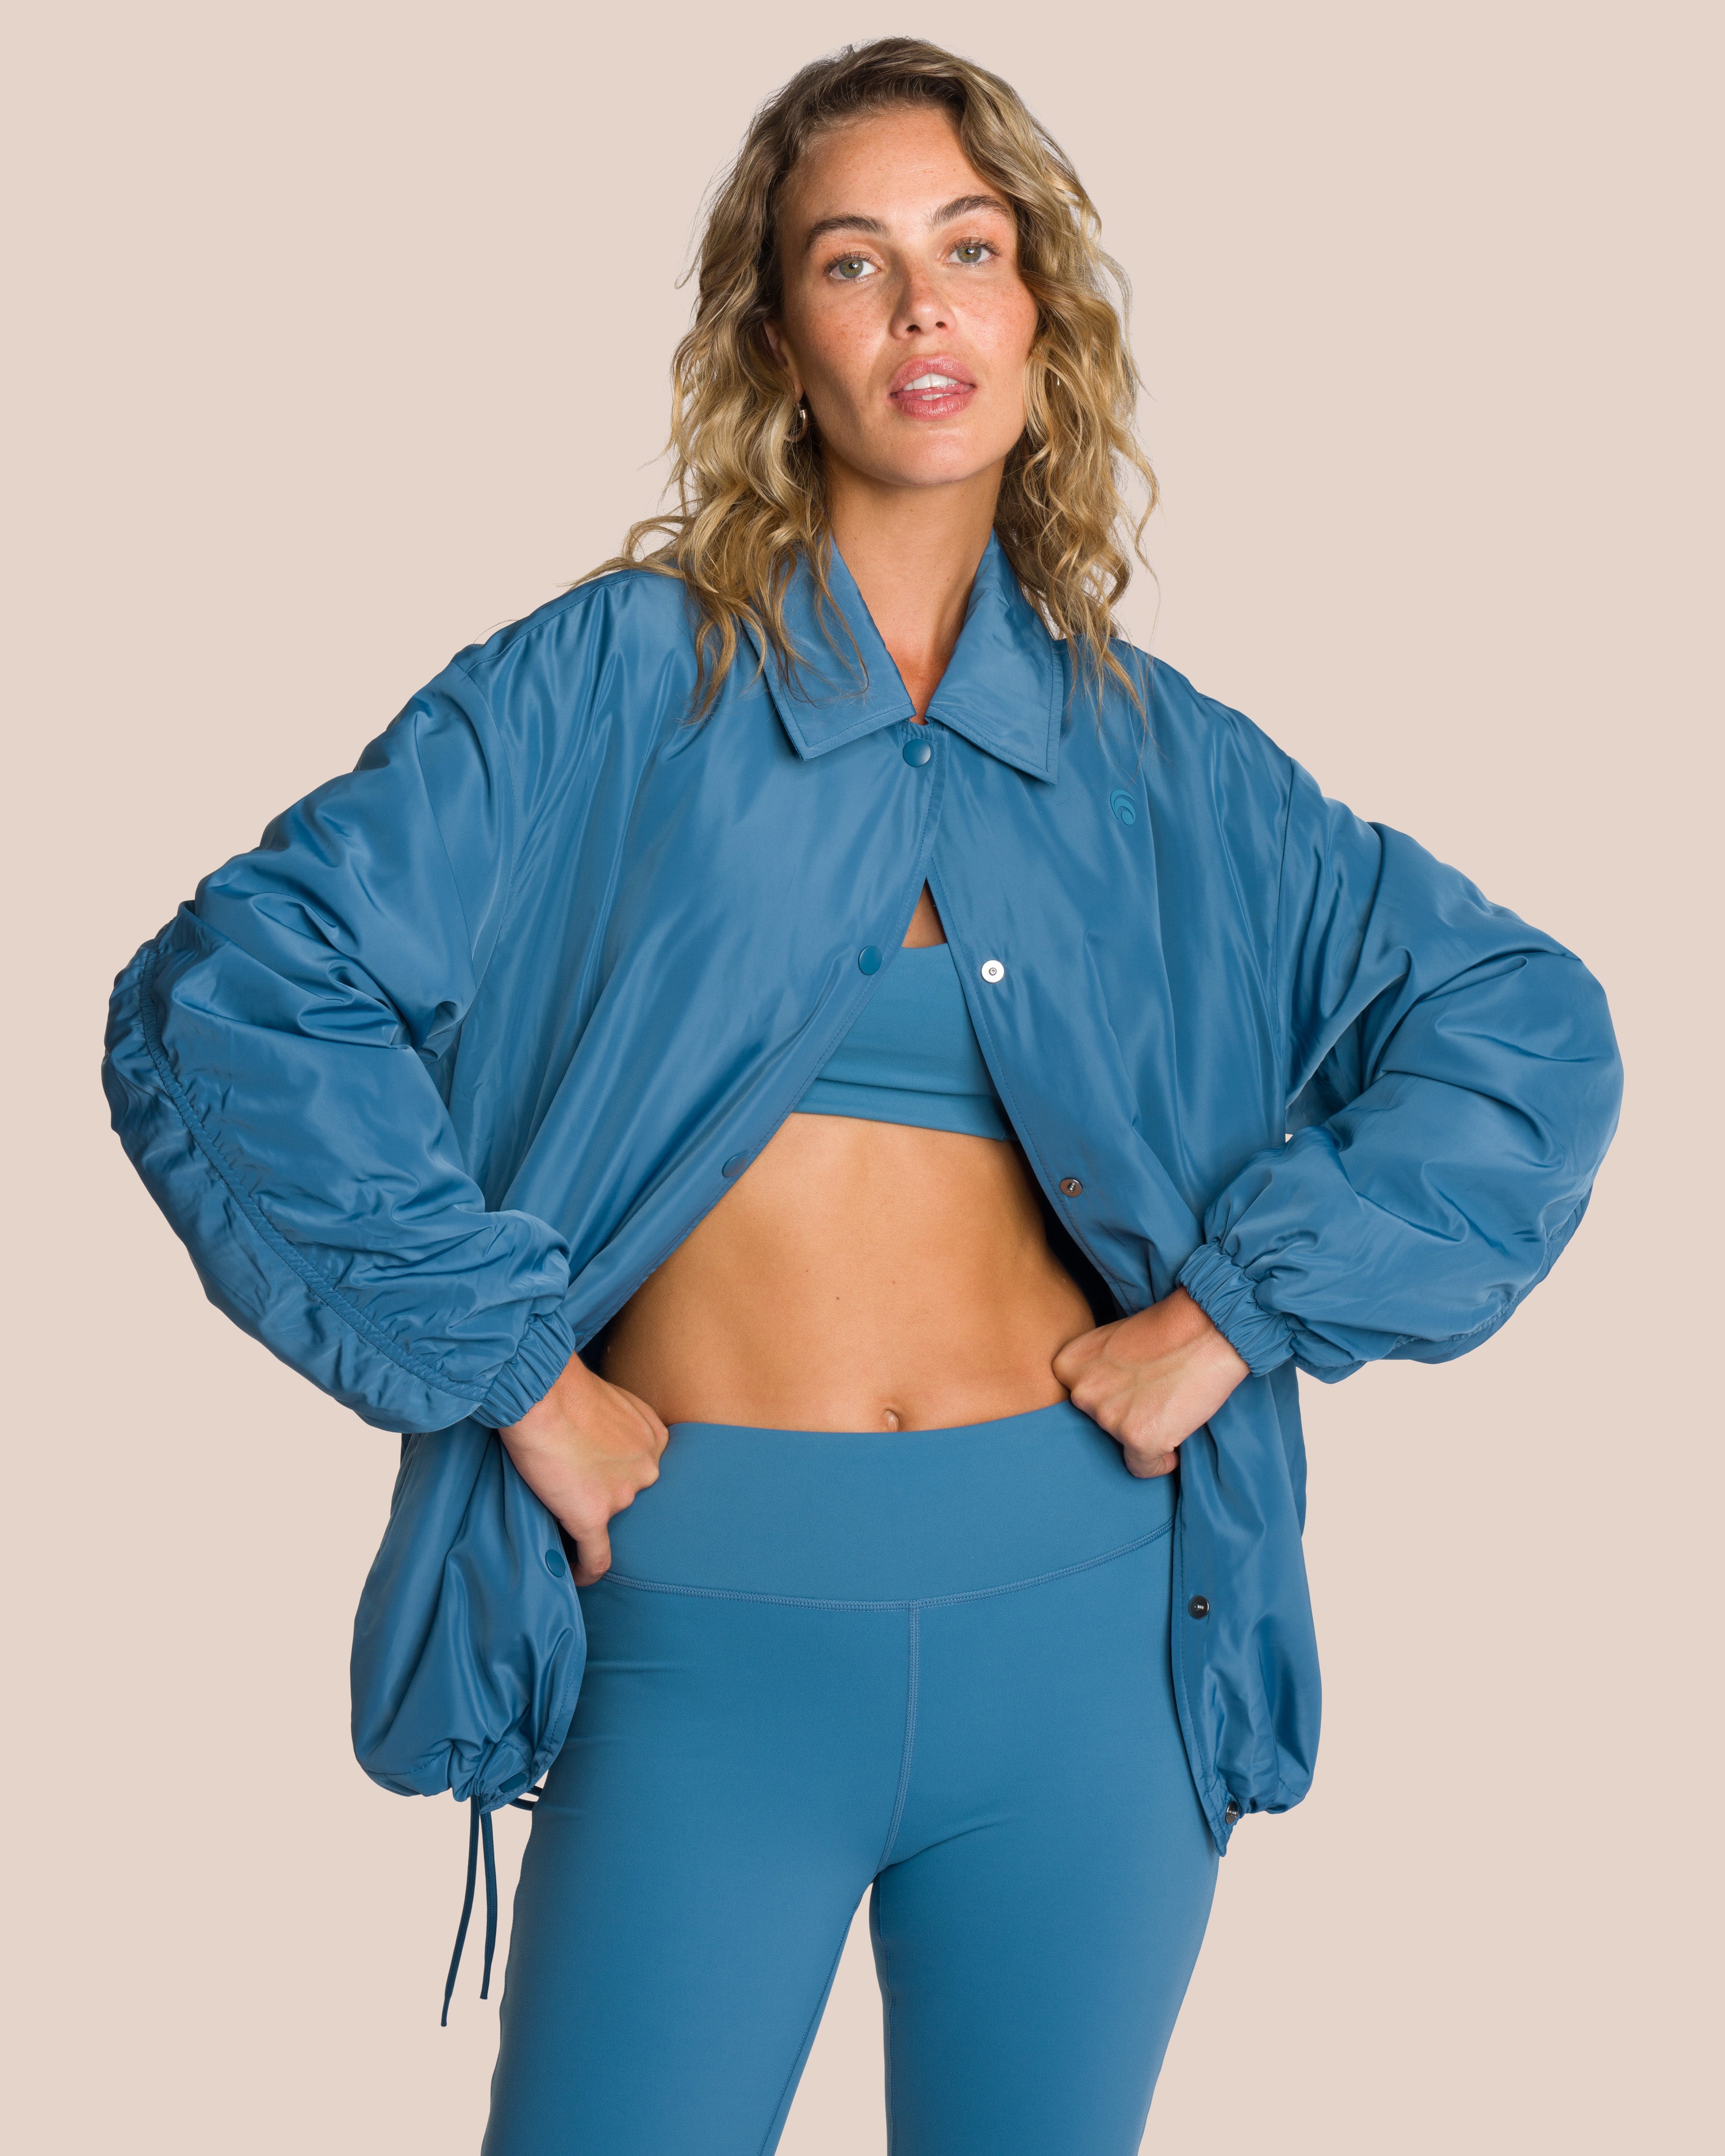 Shania Set Deluxe - Teal